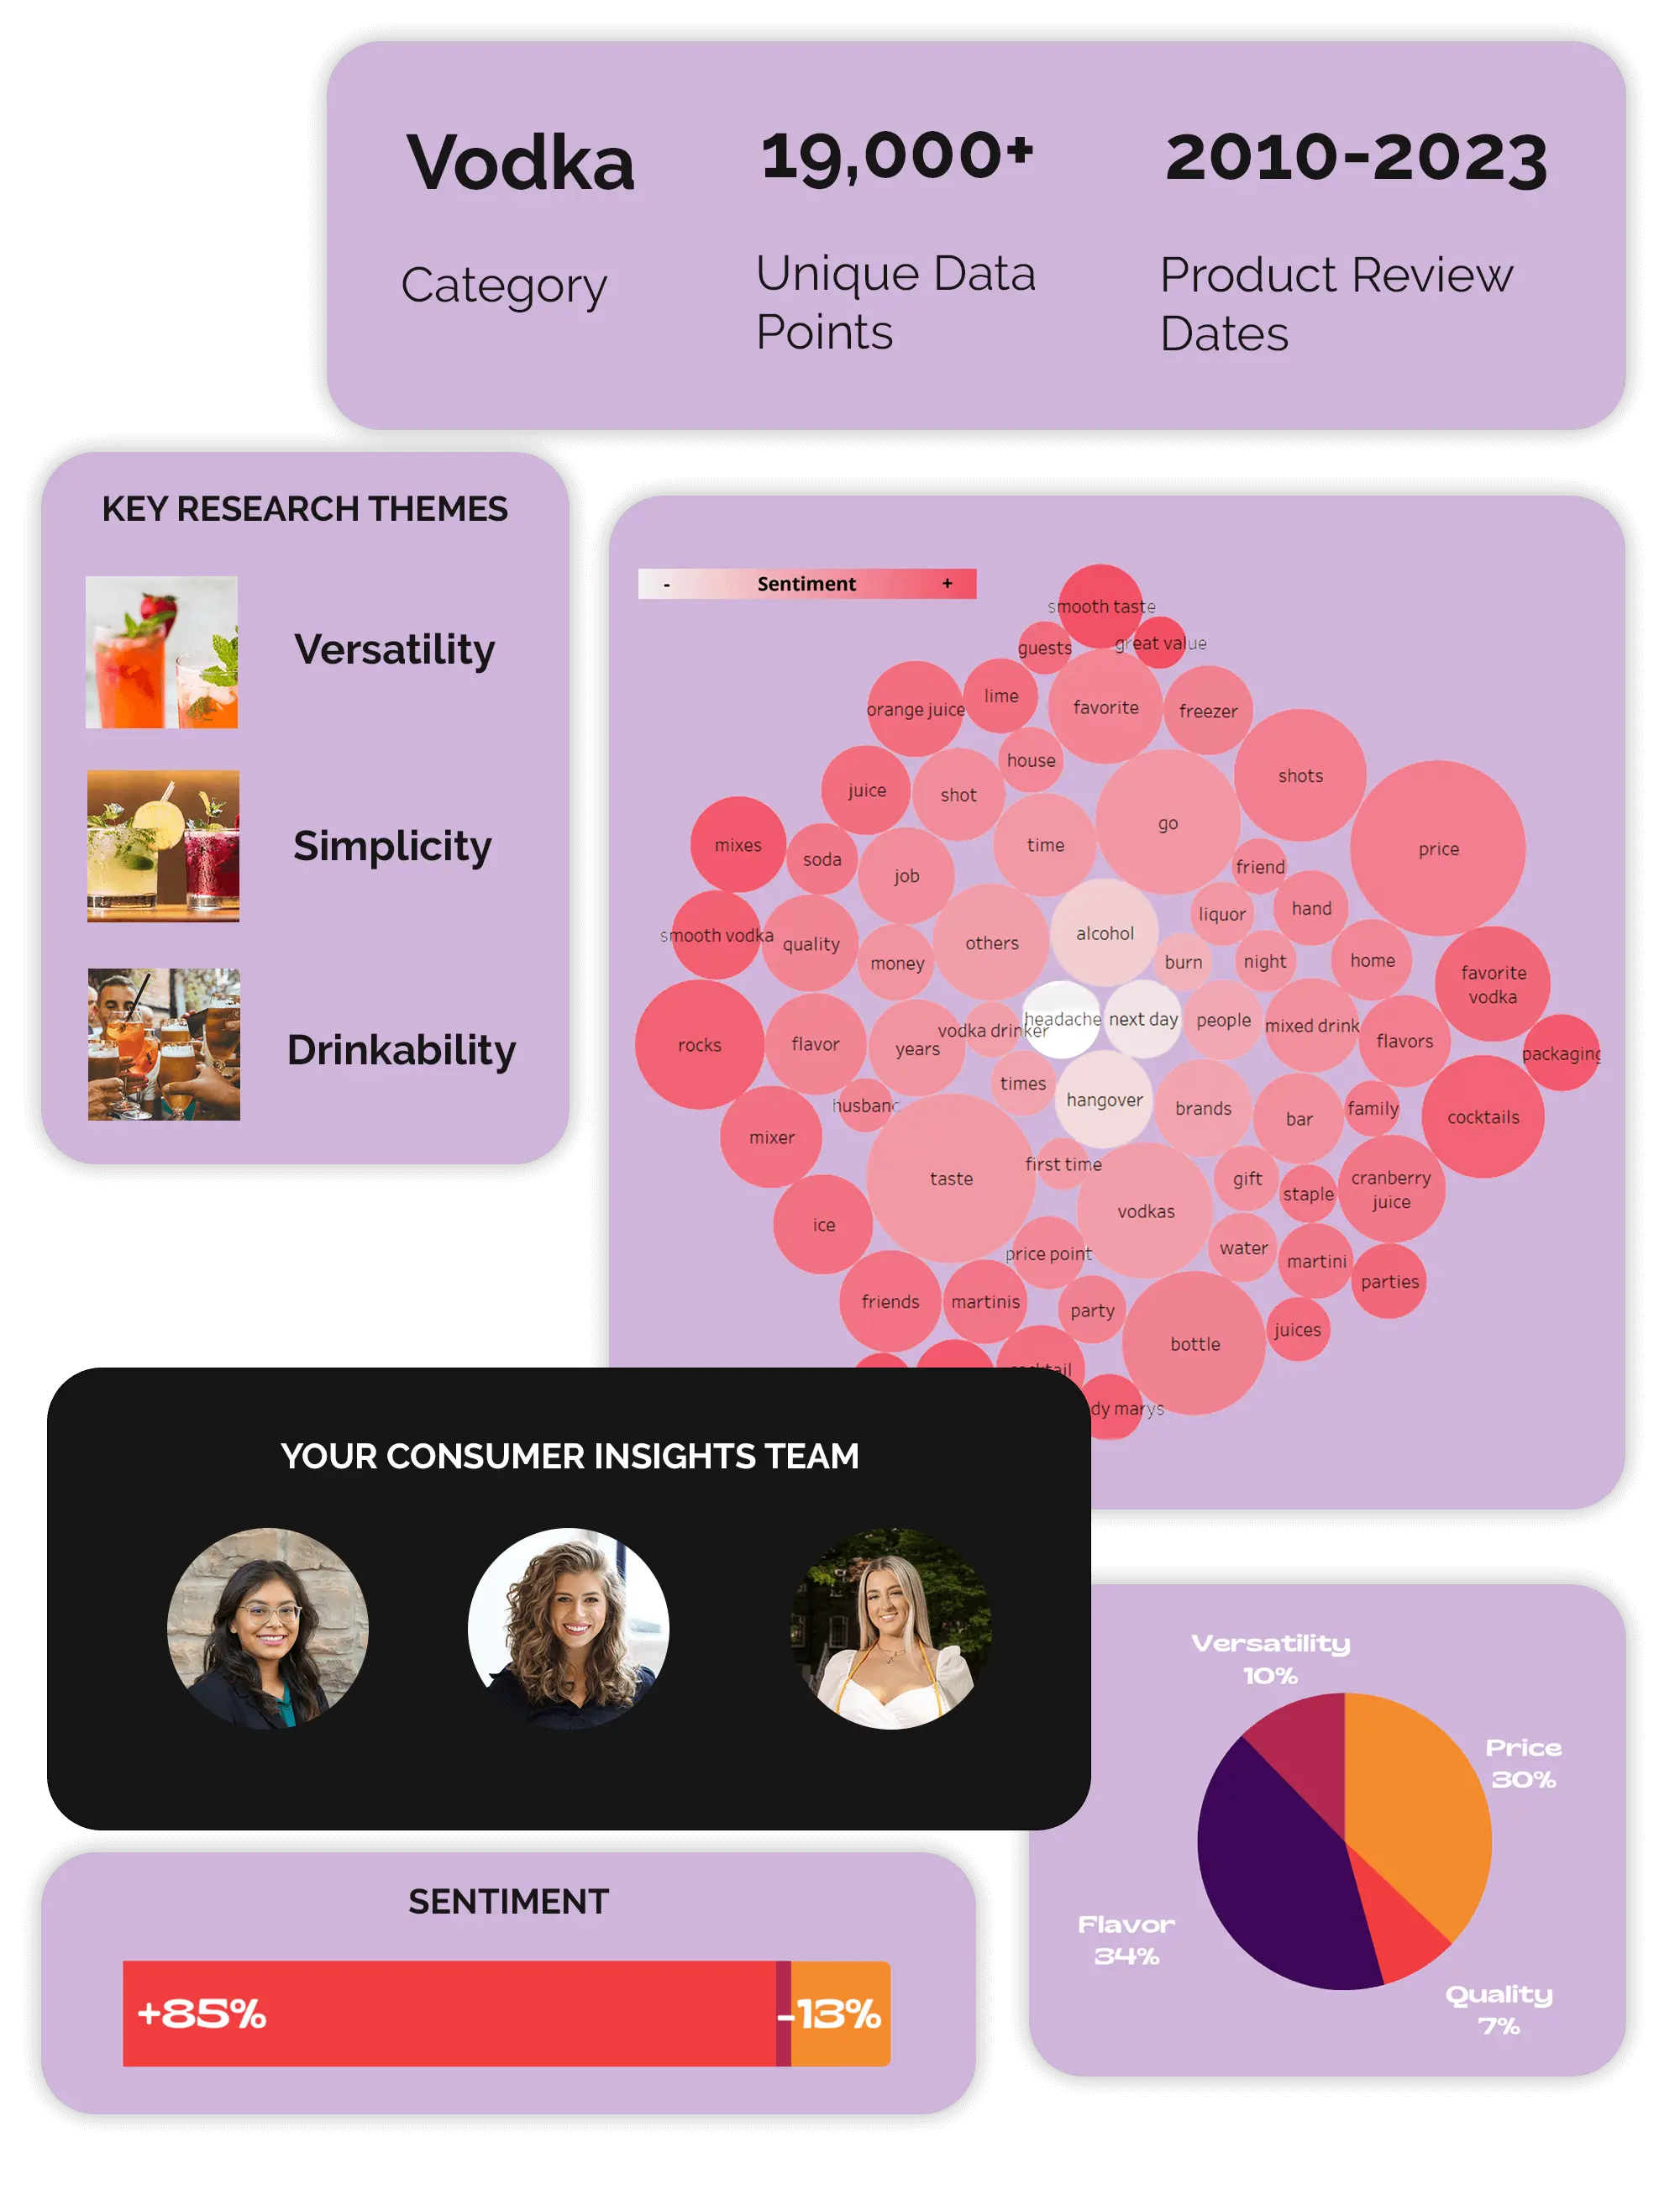 pictures of keyword bubbles, key research themes, sentiment analysis, etc to display the capabilities of our consumer insights reporting